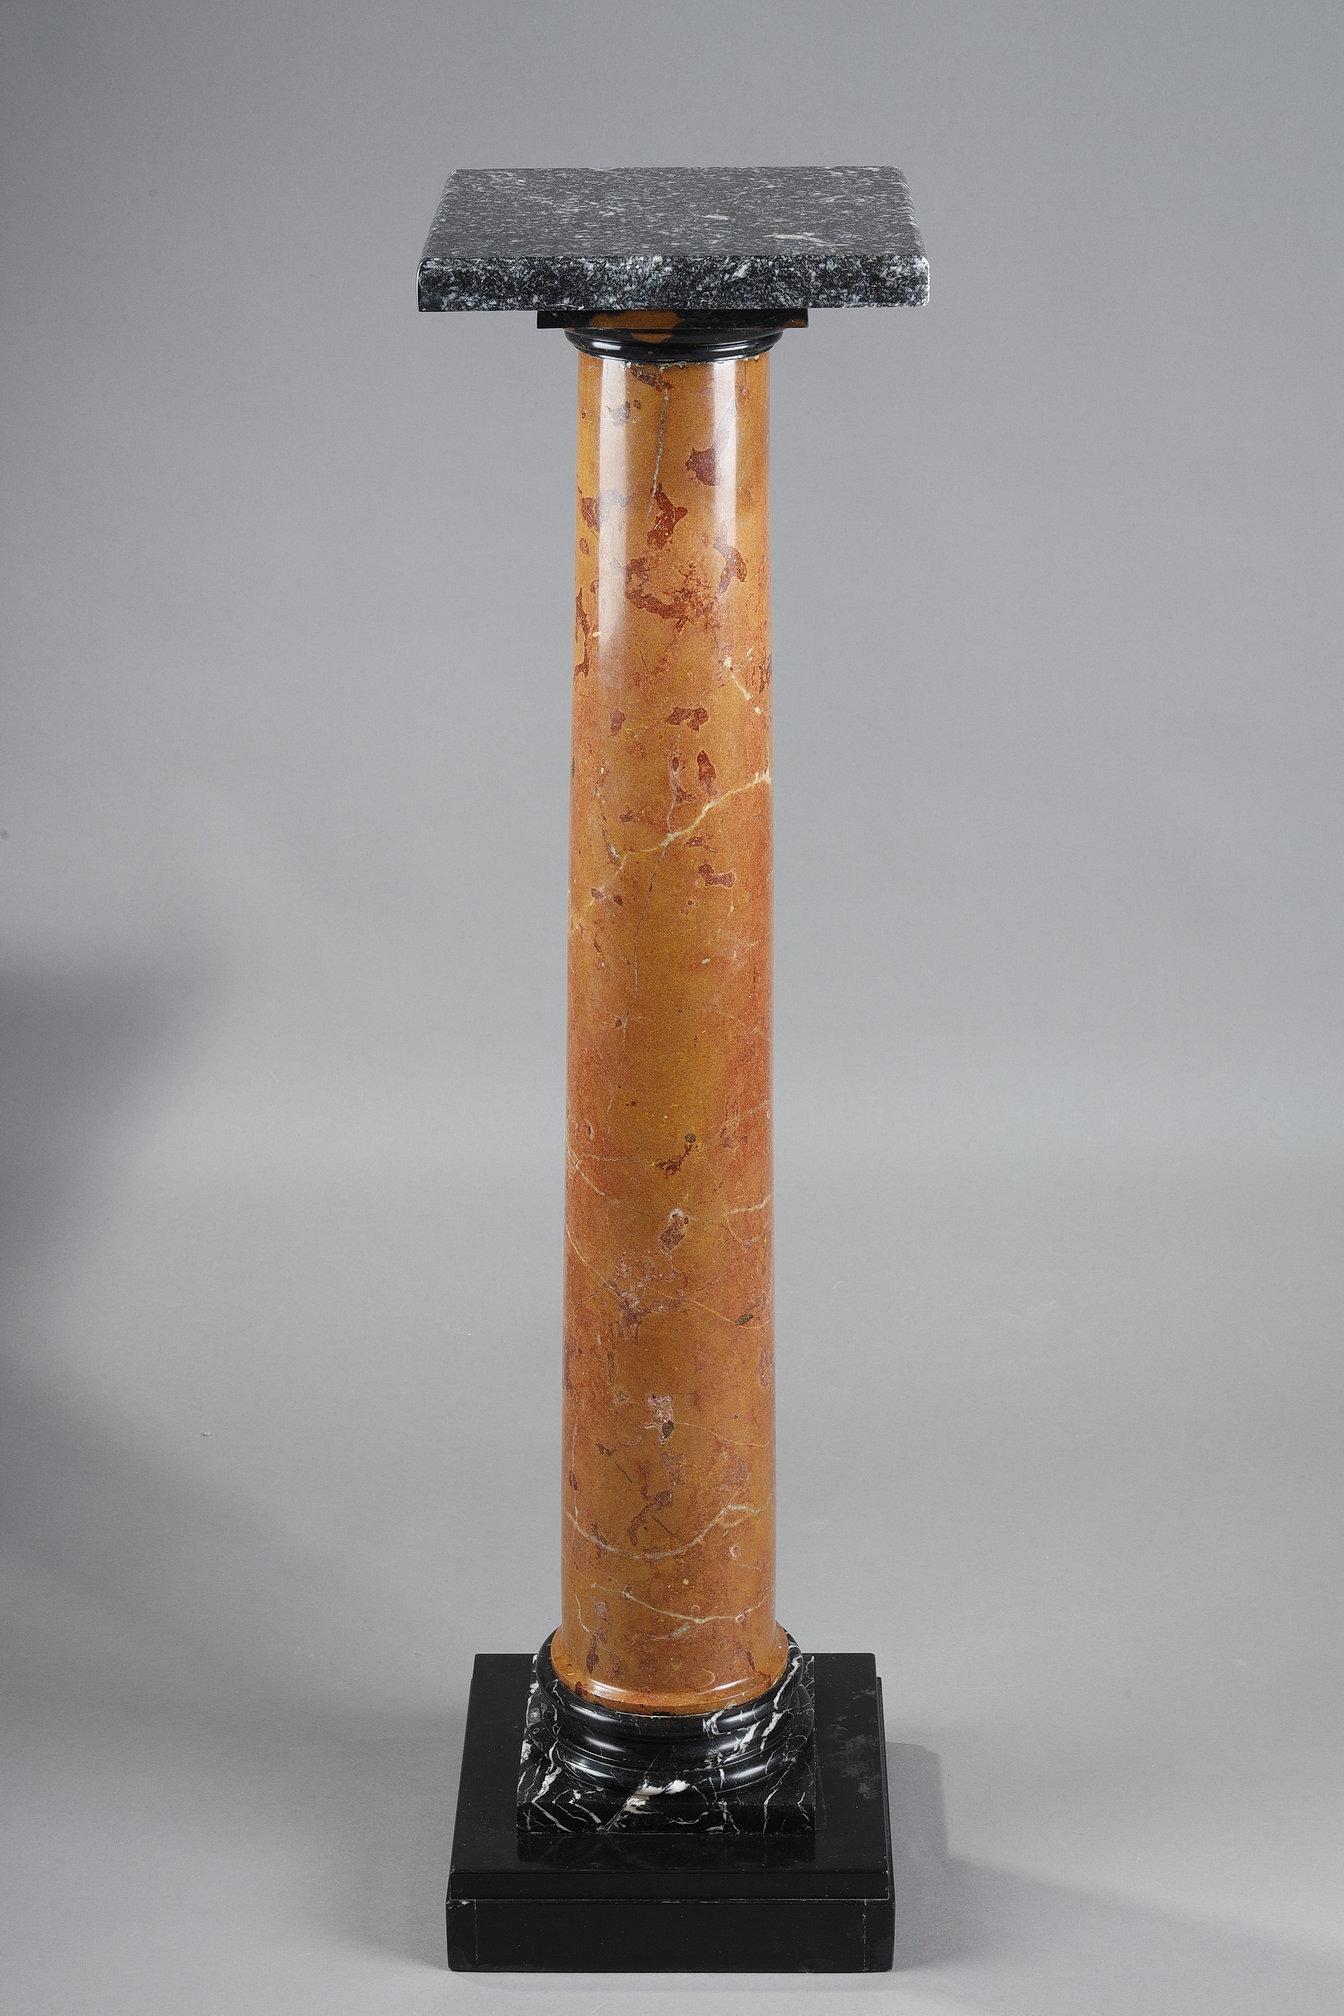 Marble column with a cylindrical shaft in red Pyrenean marble resting on a square base in grey Sainte Anne marble, on a black marble base. The swivel top is also in gray Sainte Anne marble. 